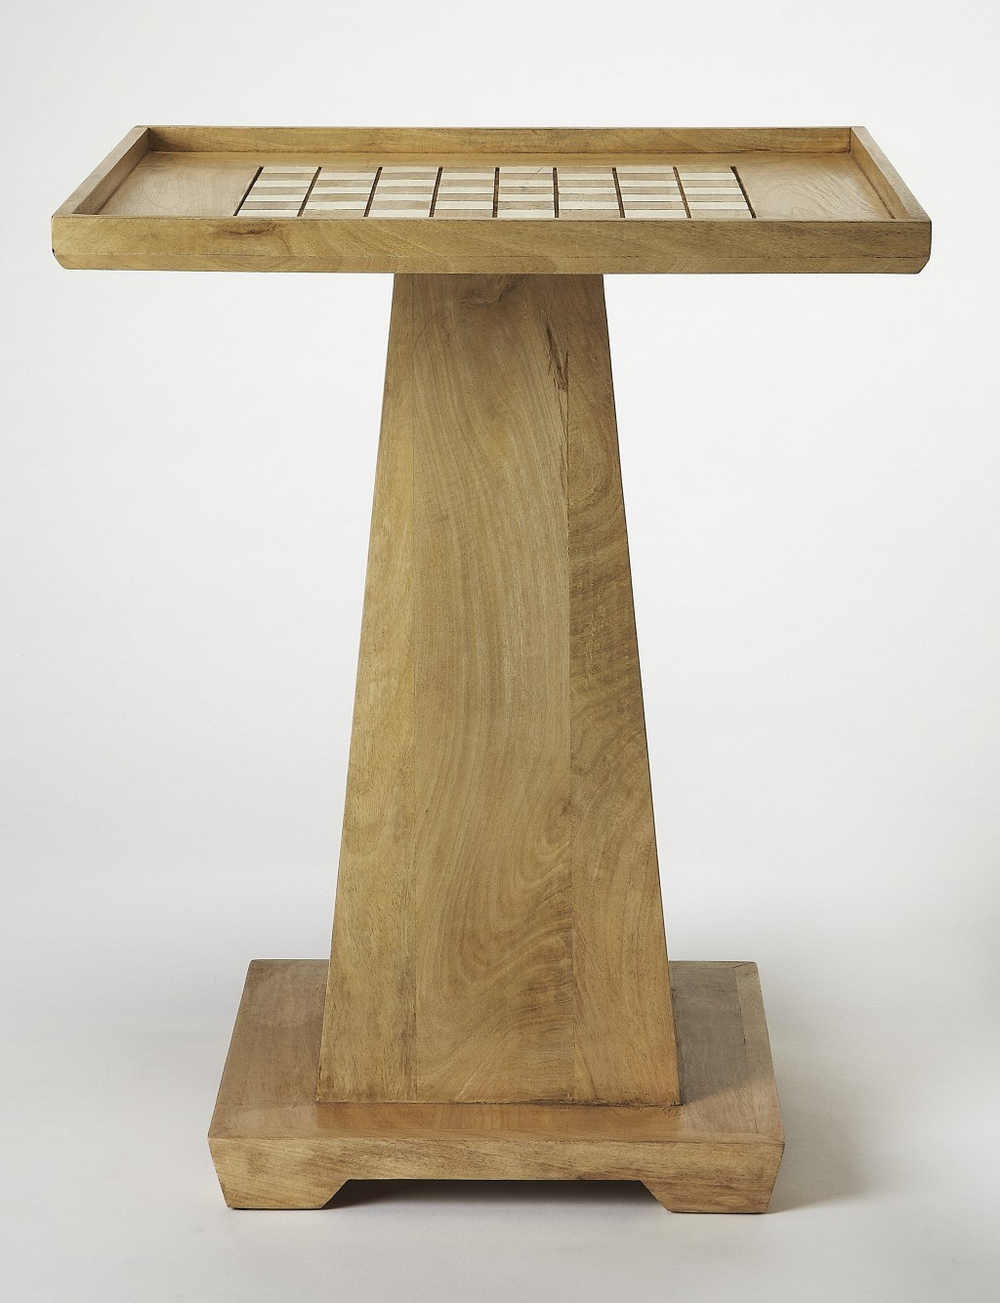 Updated Natural Wood Game Table - Rustic and Sophisticated | Perfect for Game Nights